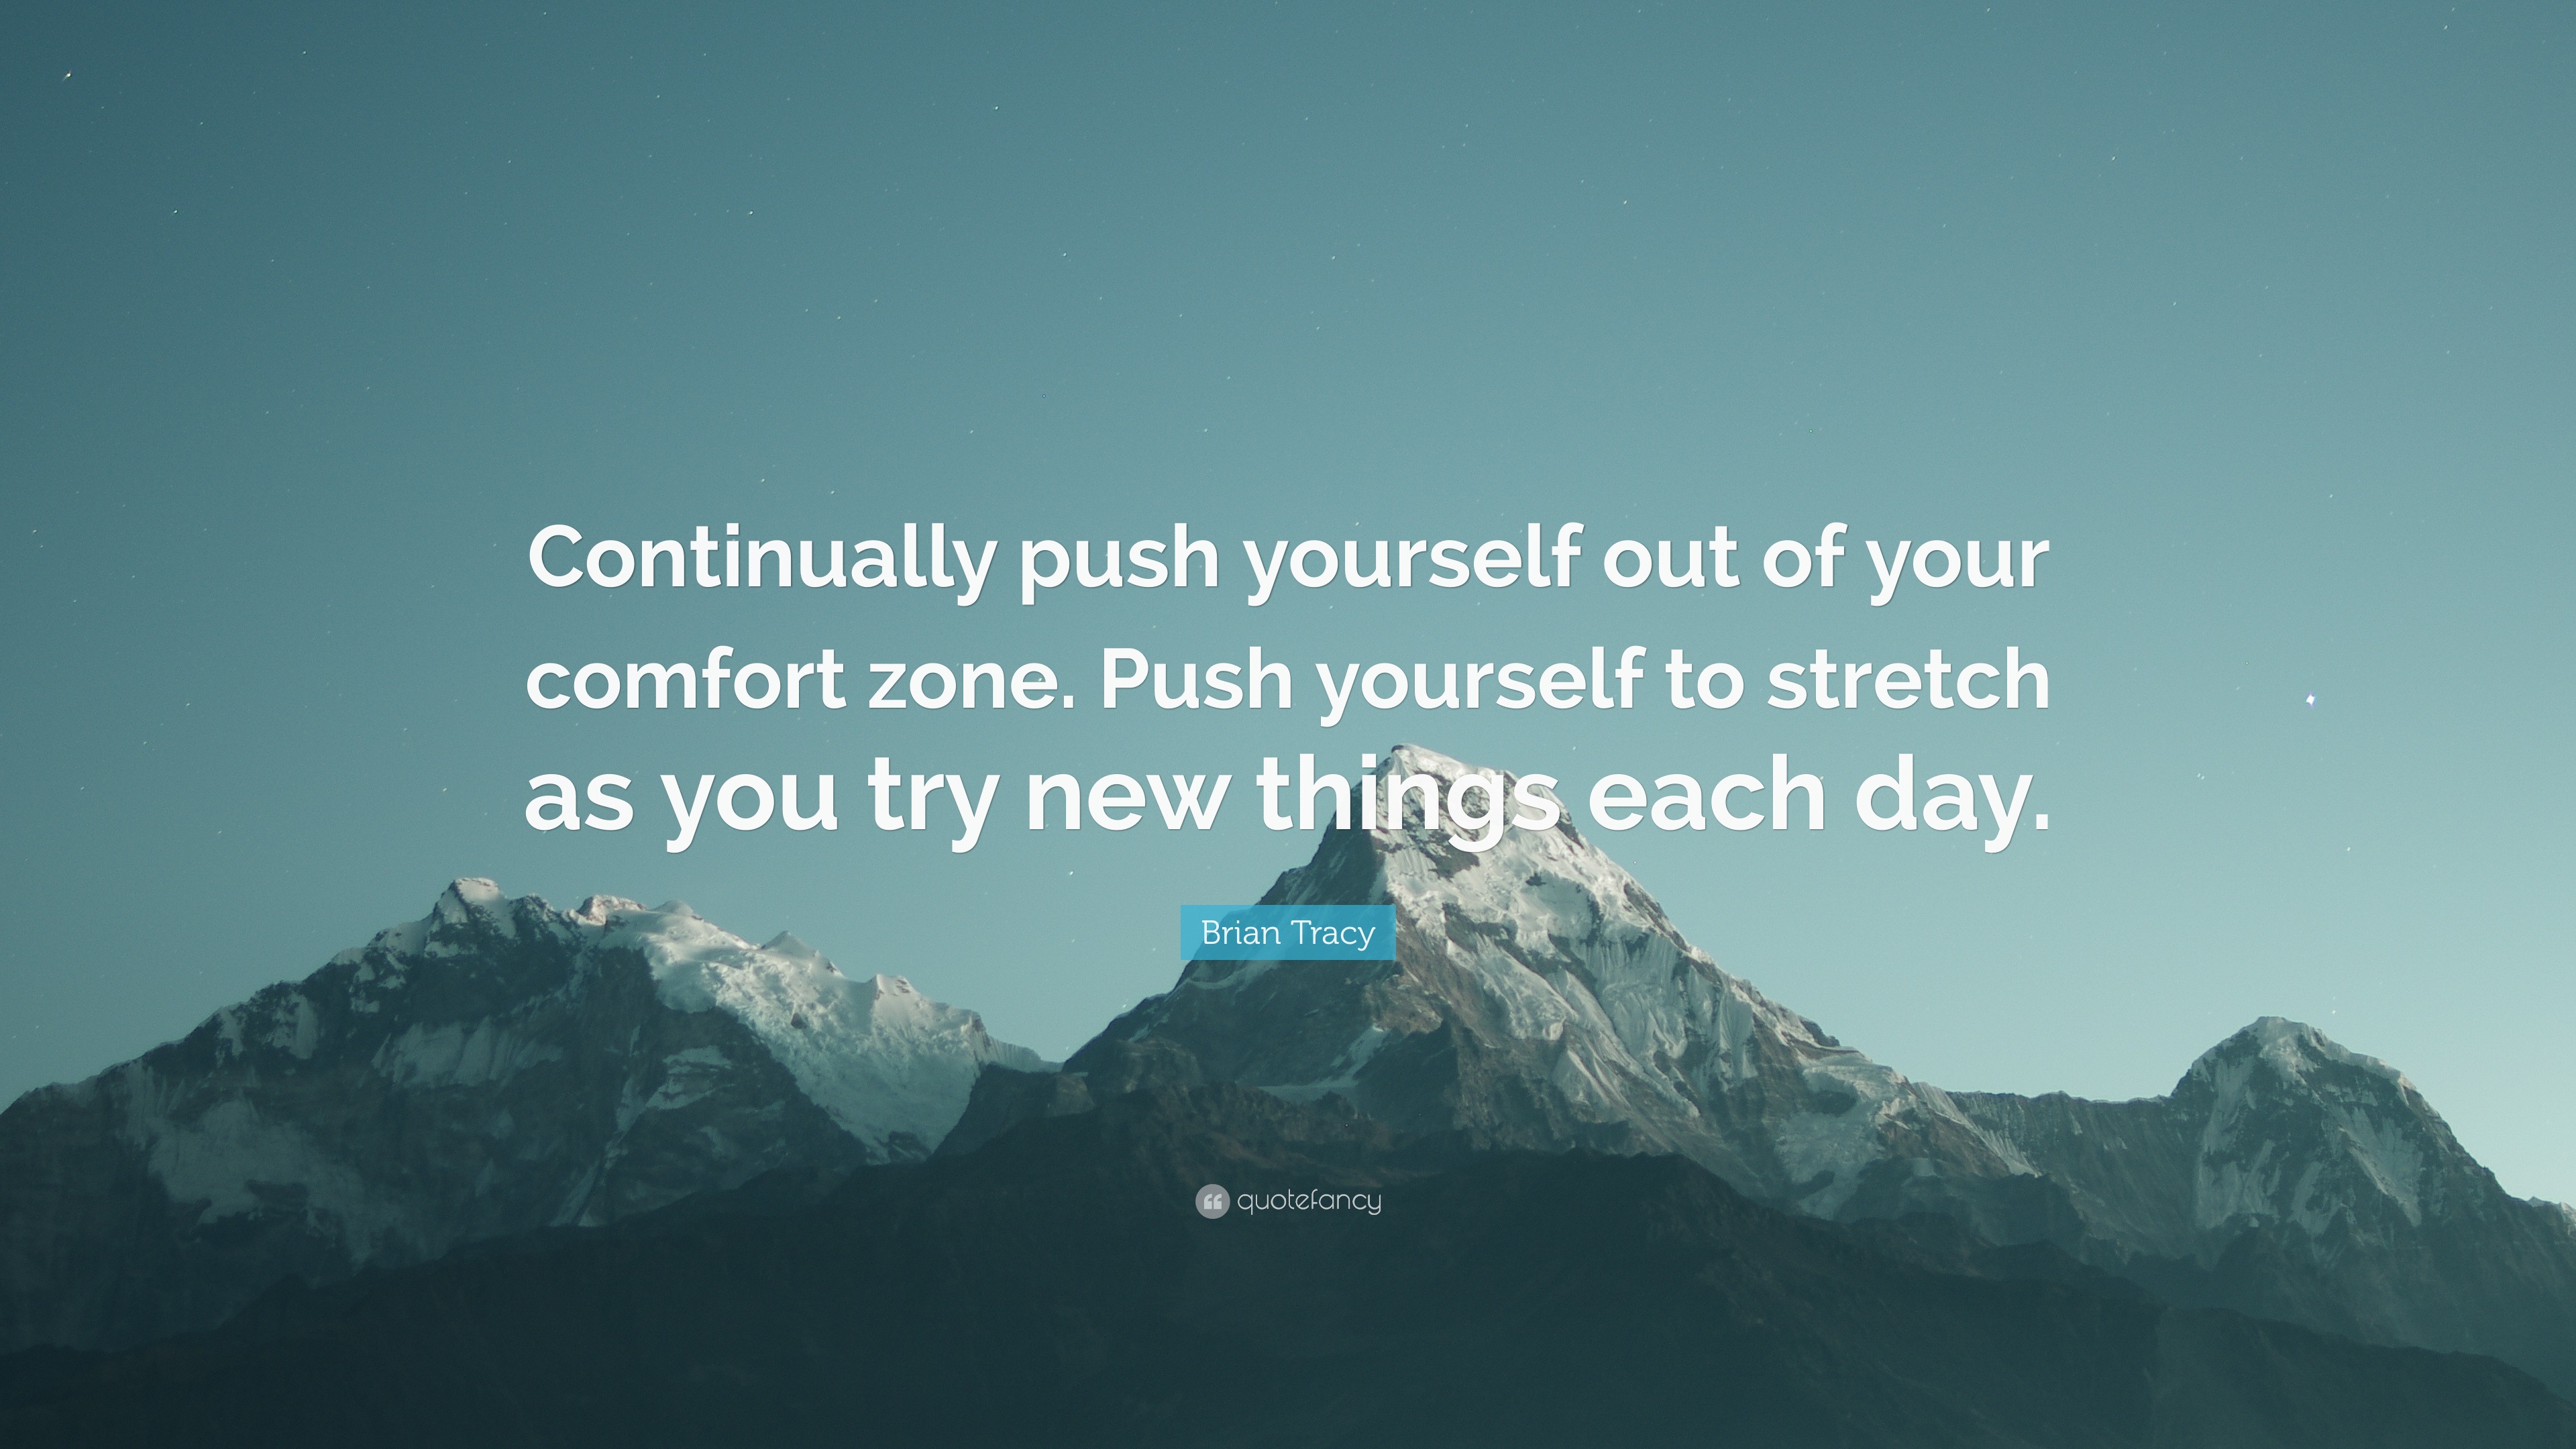 Brian Tracy Quote: “Continually push yourself out of your comfort zone.  Push yourself to stretch as